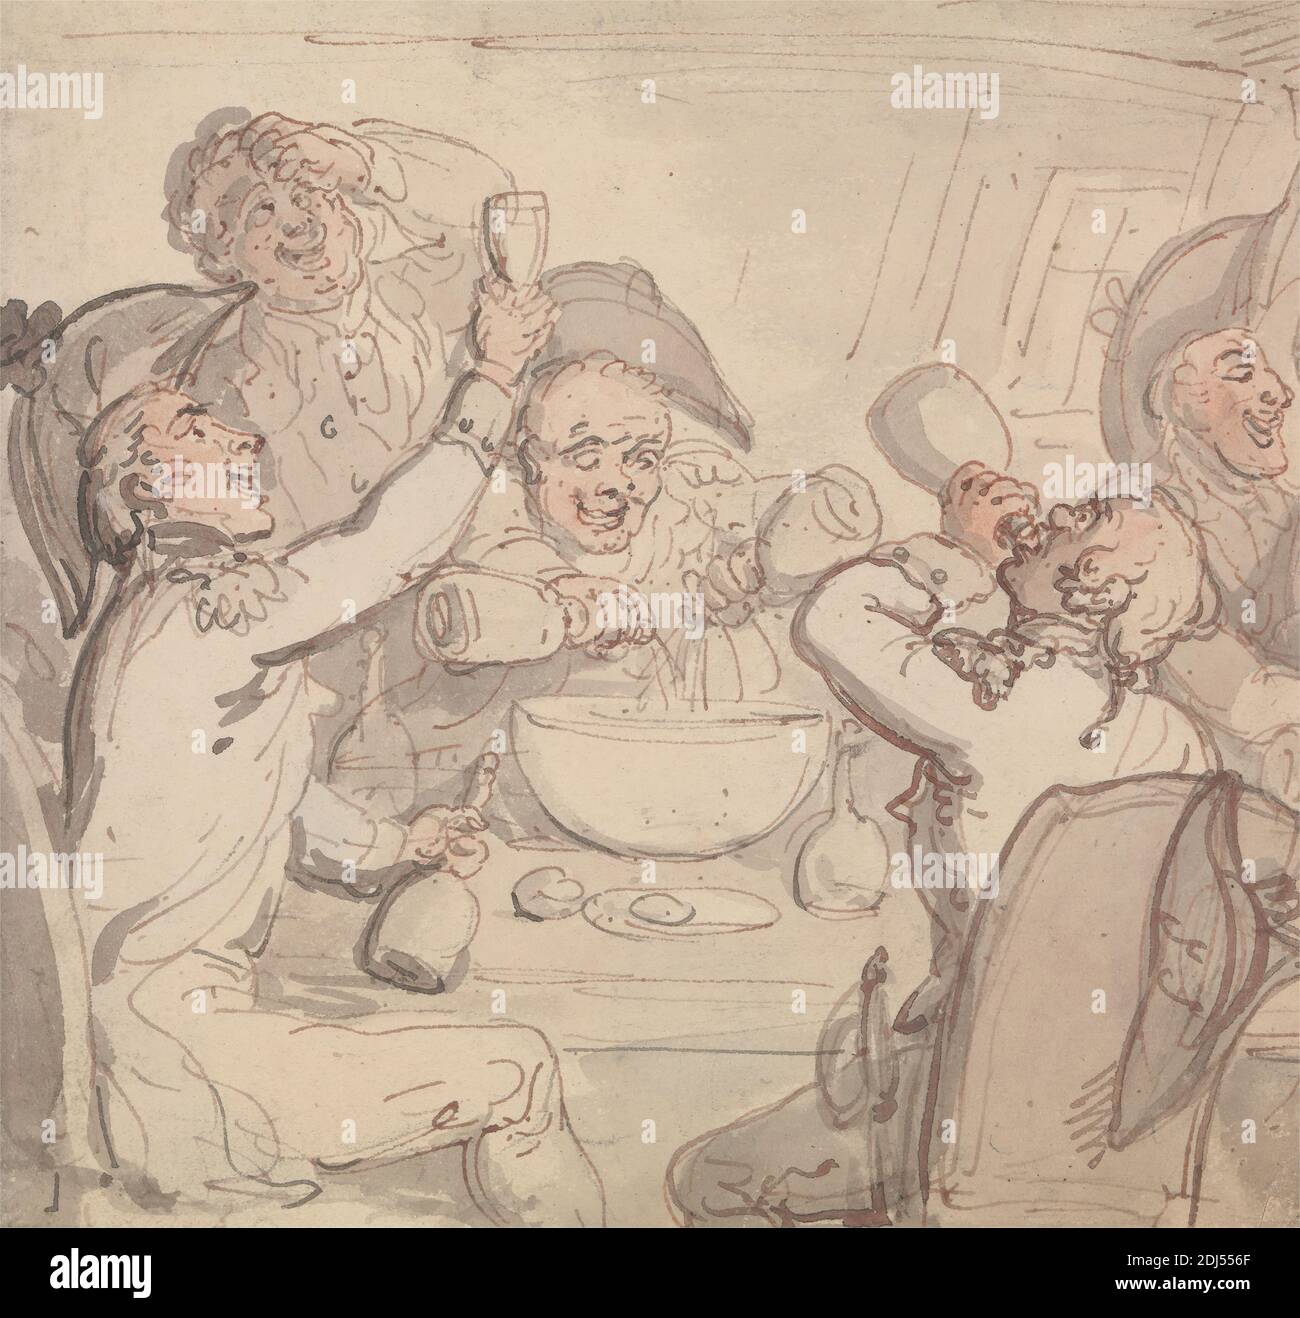 Naval Officers and a Bowl of Punch, Thomas Rowlandson, 1756–1827, British, undated, Watercolor and graphite with pen and red ink and pen and gray ink on medium, slightly textured, cream wove paper, Sheet: 5 11/16 x 6 inches (14.4 x 15.2 cm), chairs, drinking, food, genre subject, glasses (drinking glasses), hats, men, naval auxiliary ship, officers (military officers), punch bowl, table (support furniture Stock Photo